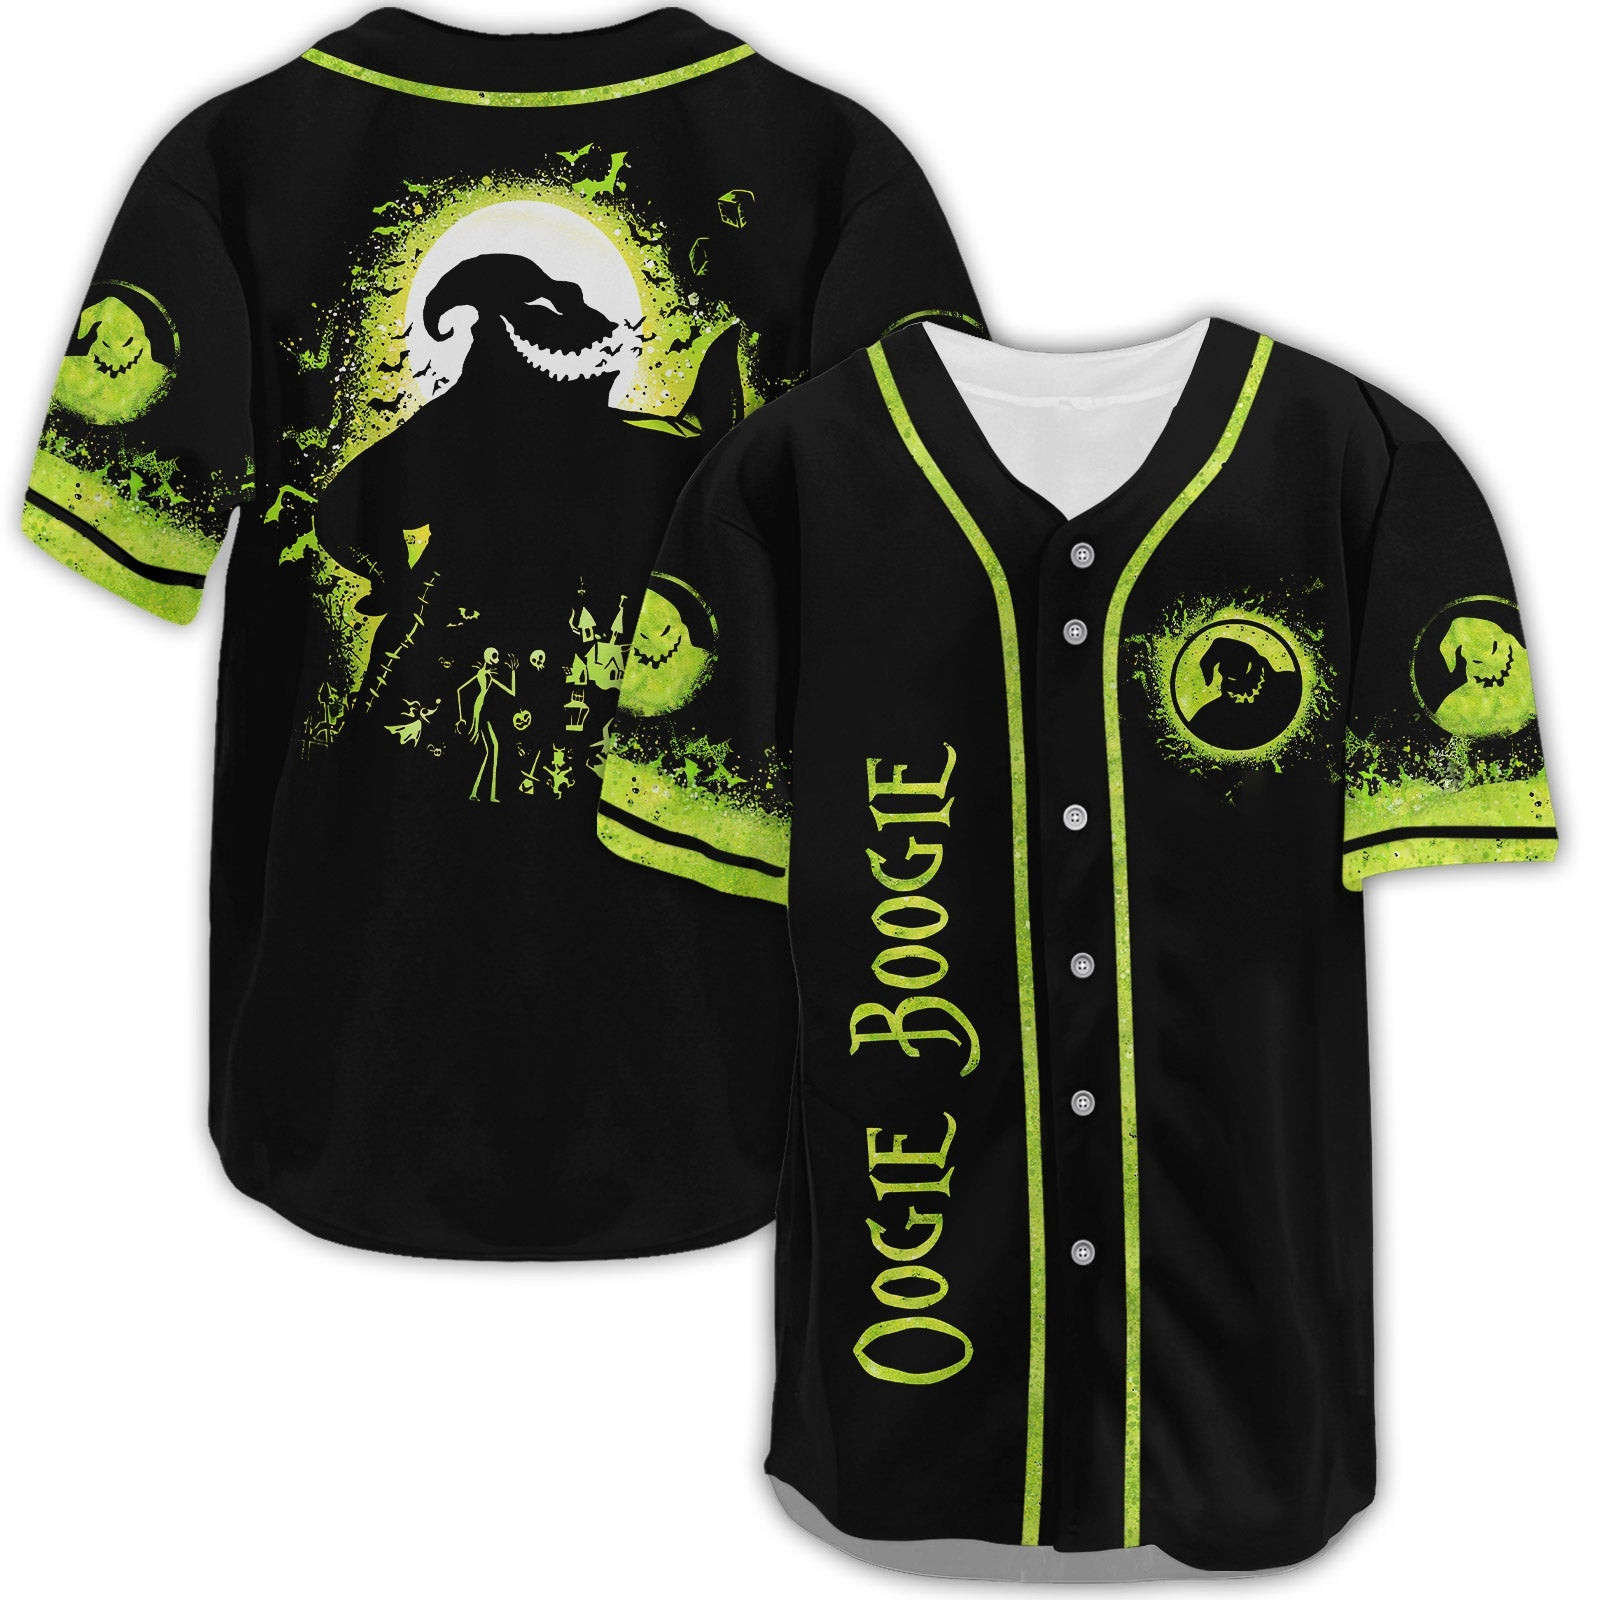 Kingdom Hearts Oogie Boogie Character Jersey Shirt